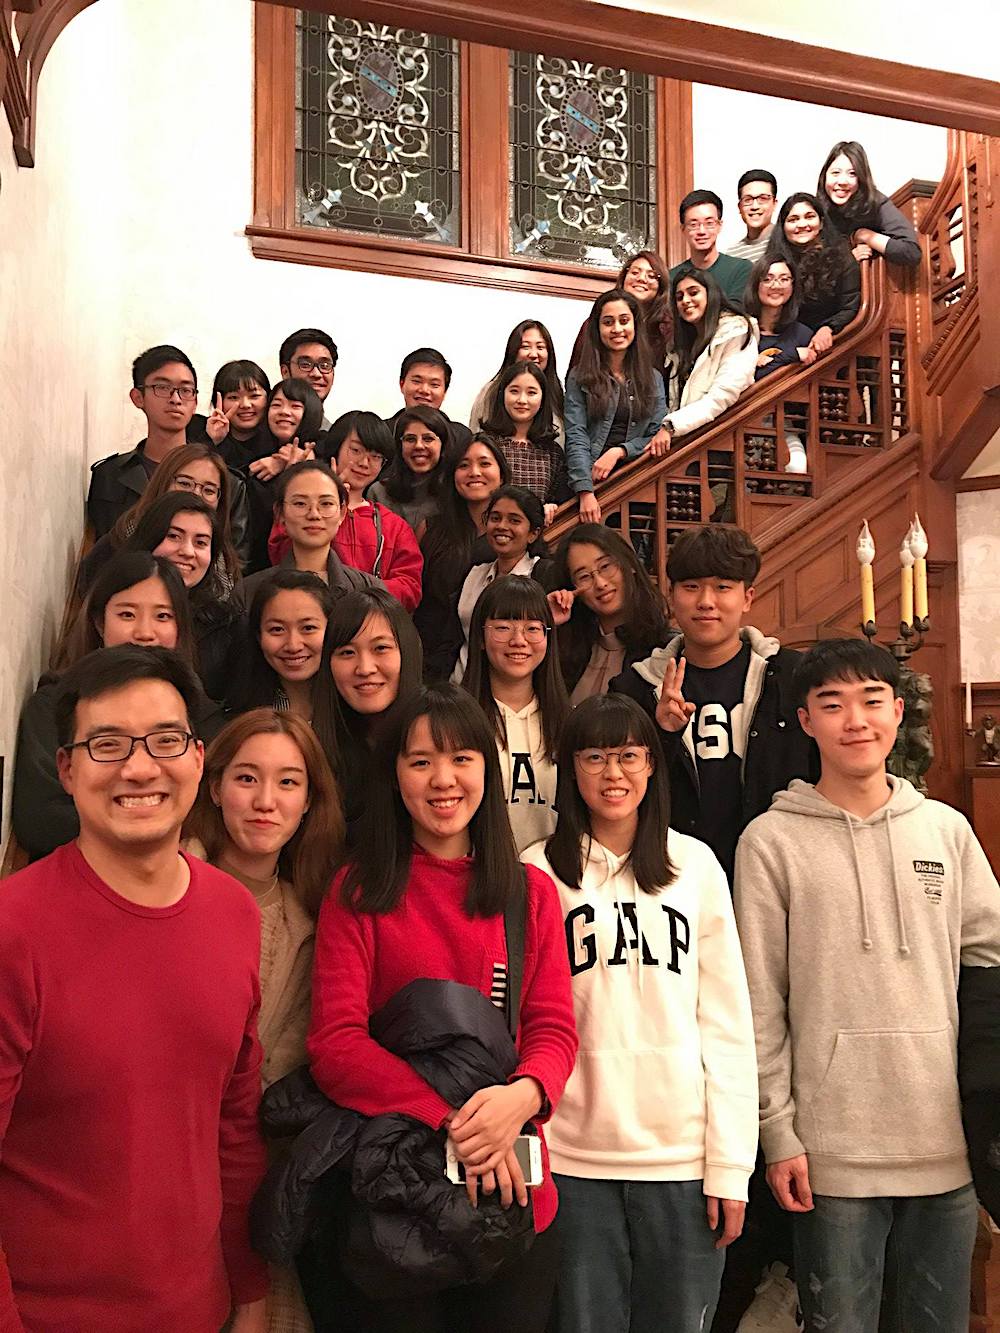 Occupational Therapy students from Yonsei University and Inje University (South Korea) and Kaohsiung Medical University (Taiwan) with USC Chan students at the USC Center for Occupation and Lifestyle Redesign, February 2019